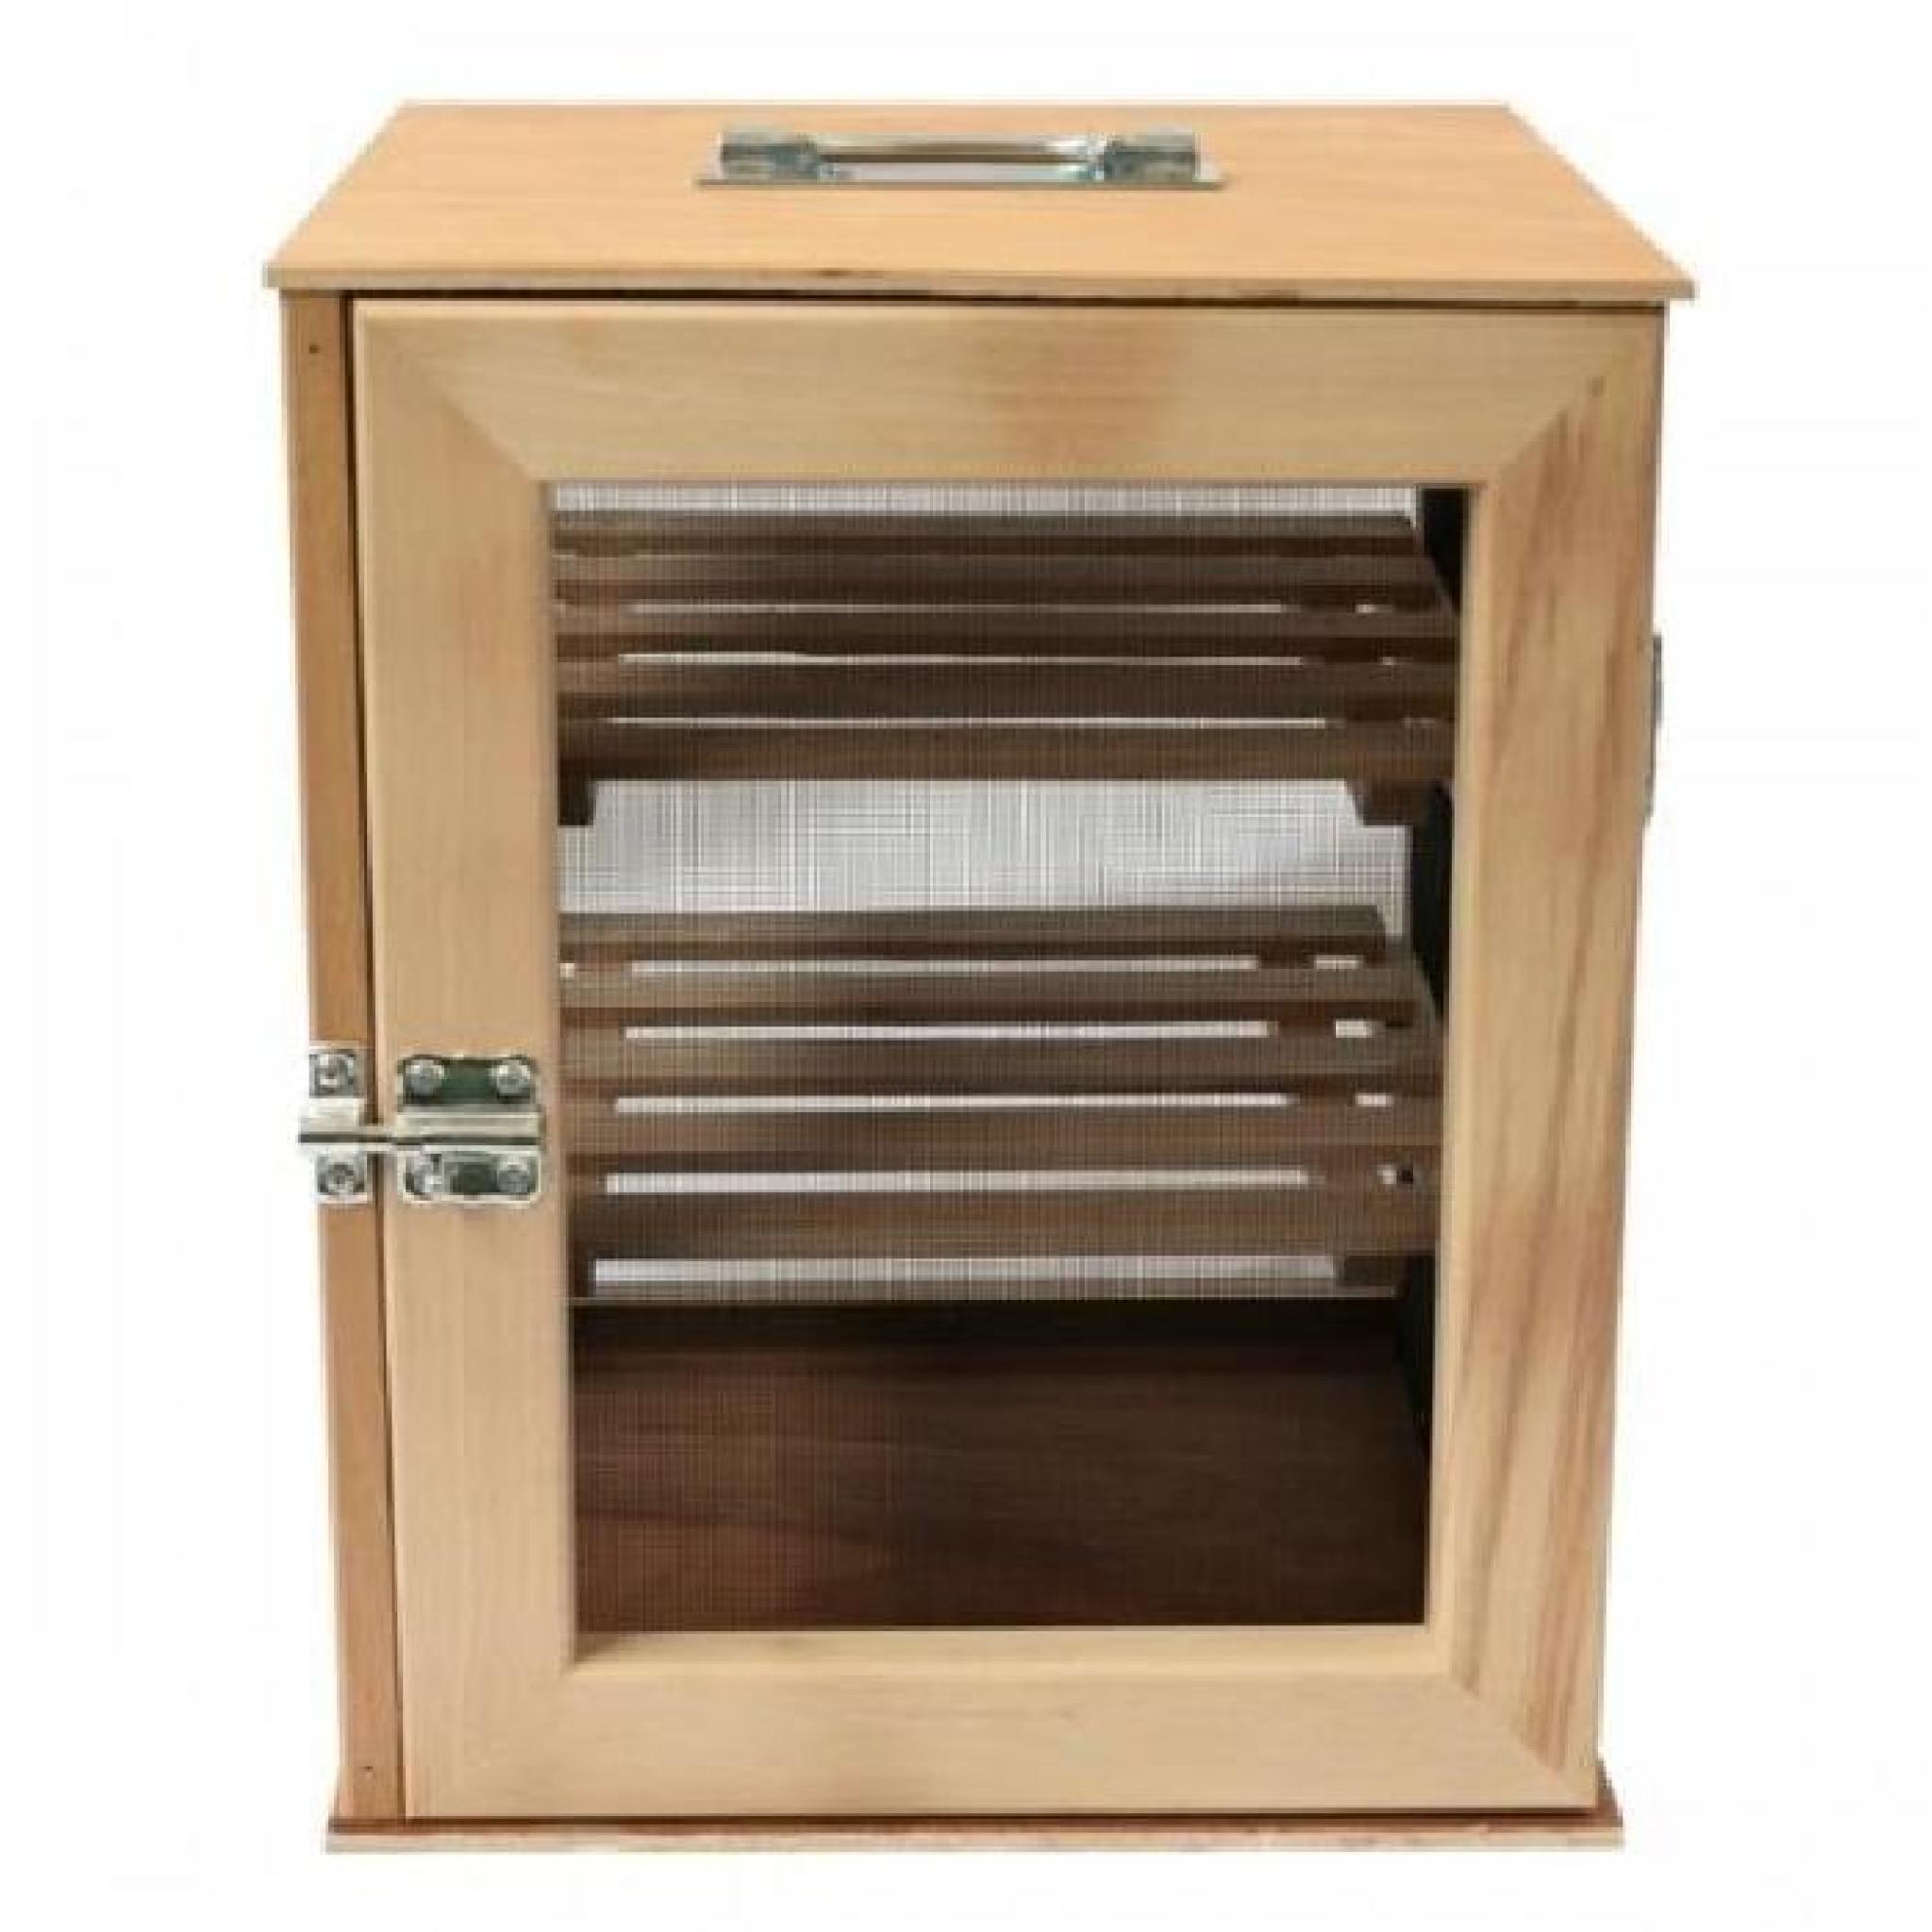 Masy 205 Garde Manger Fromager 3 étages Grand Modèle pas cher